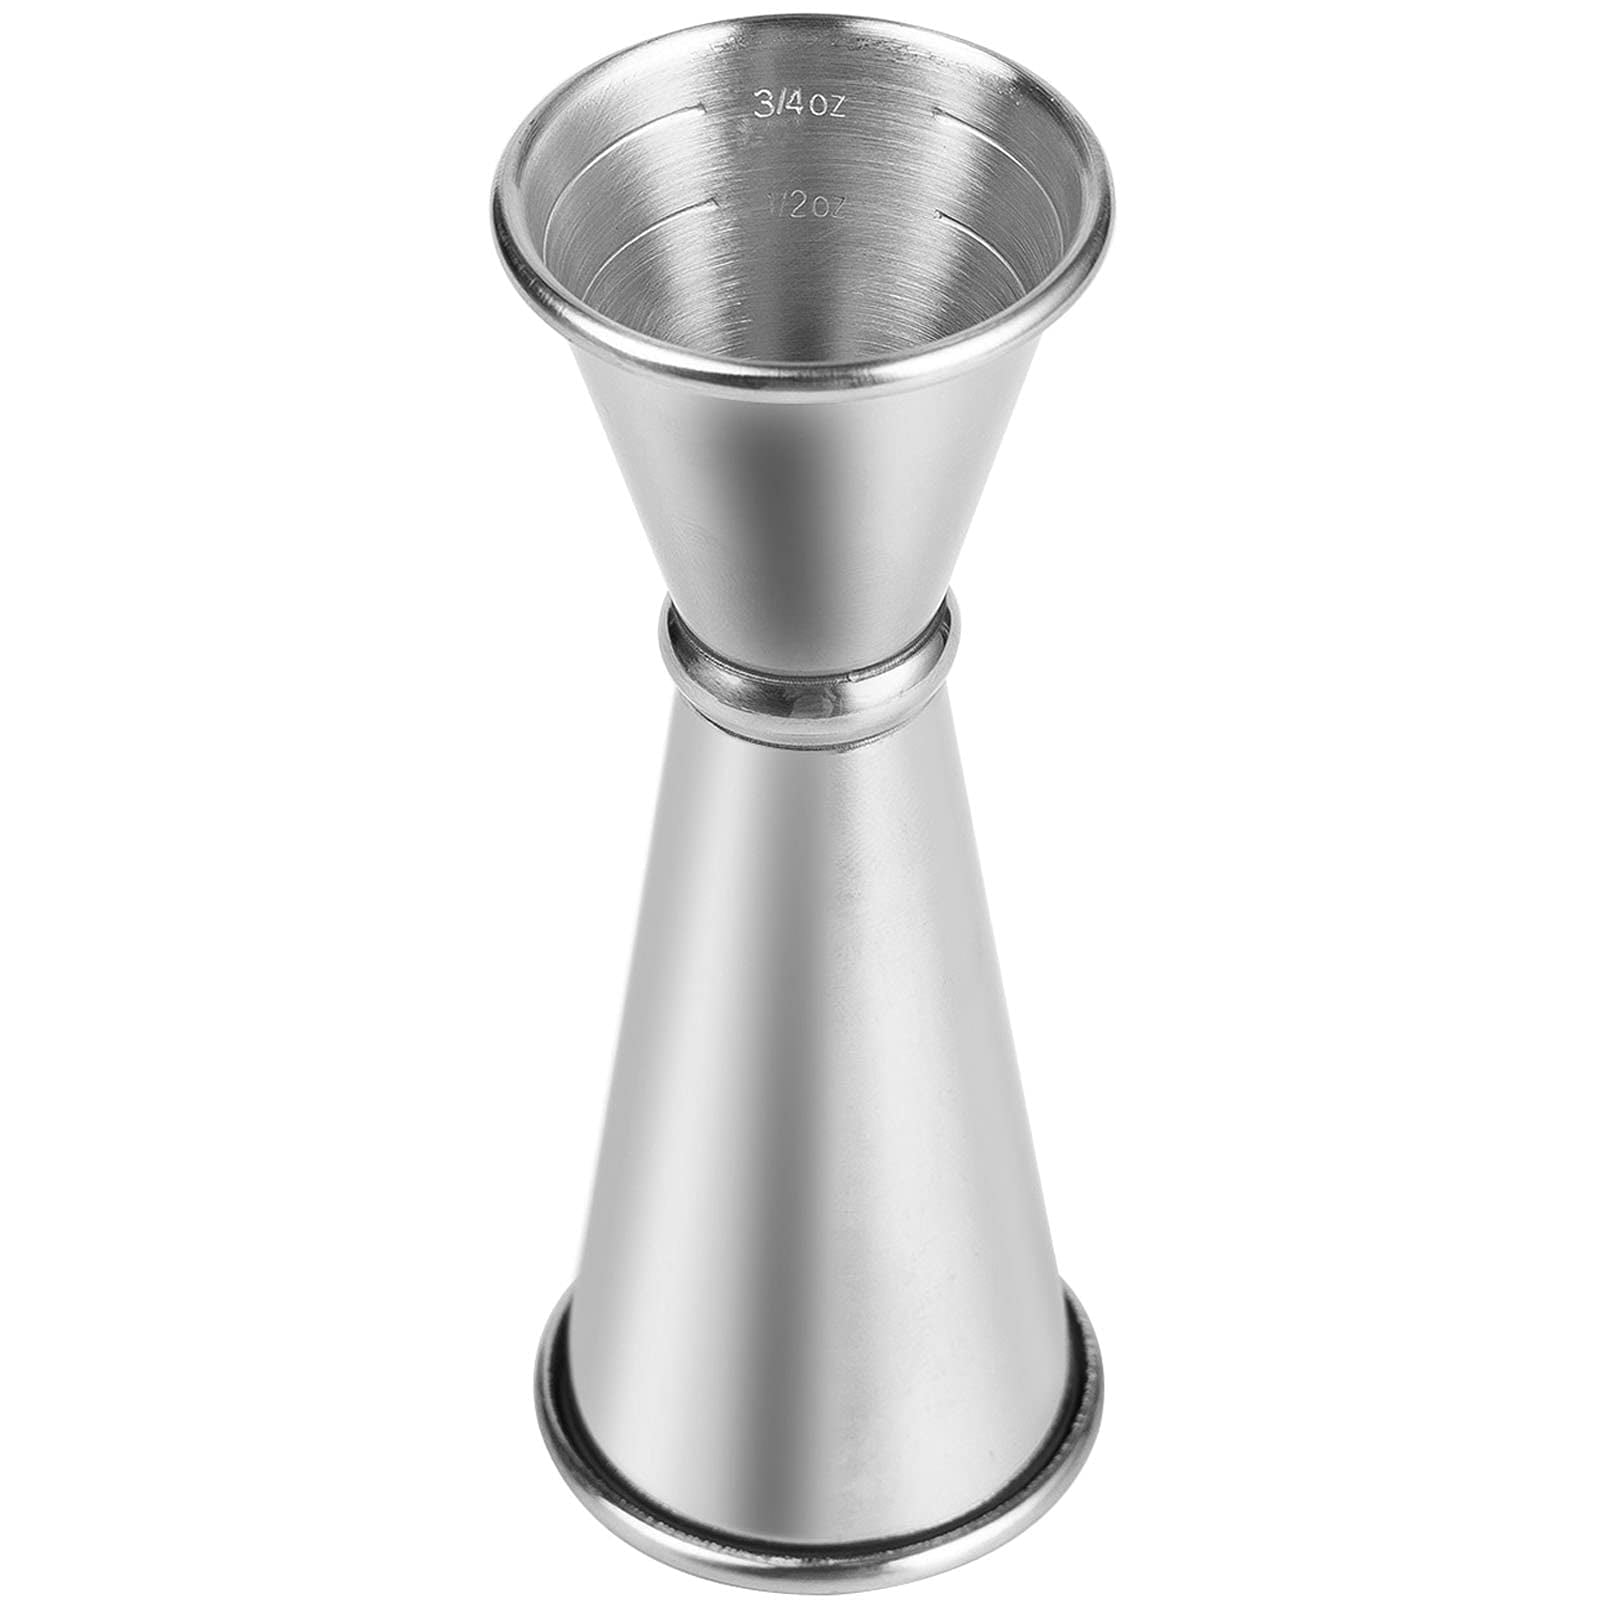  Xnferty Cocktail Shaker Double Headed Jigger, Wine Cocktail  Shaker, Shot Measure Jigger, Stainless Steel Wine Measuring Cup Straight  Edge Design Classic Style Stainless Steel Drink Shaker: Home & Kitchen